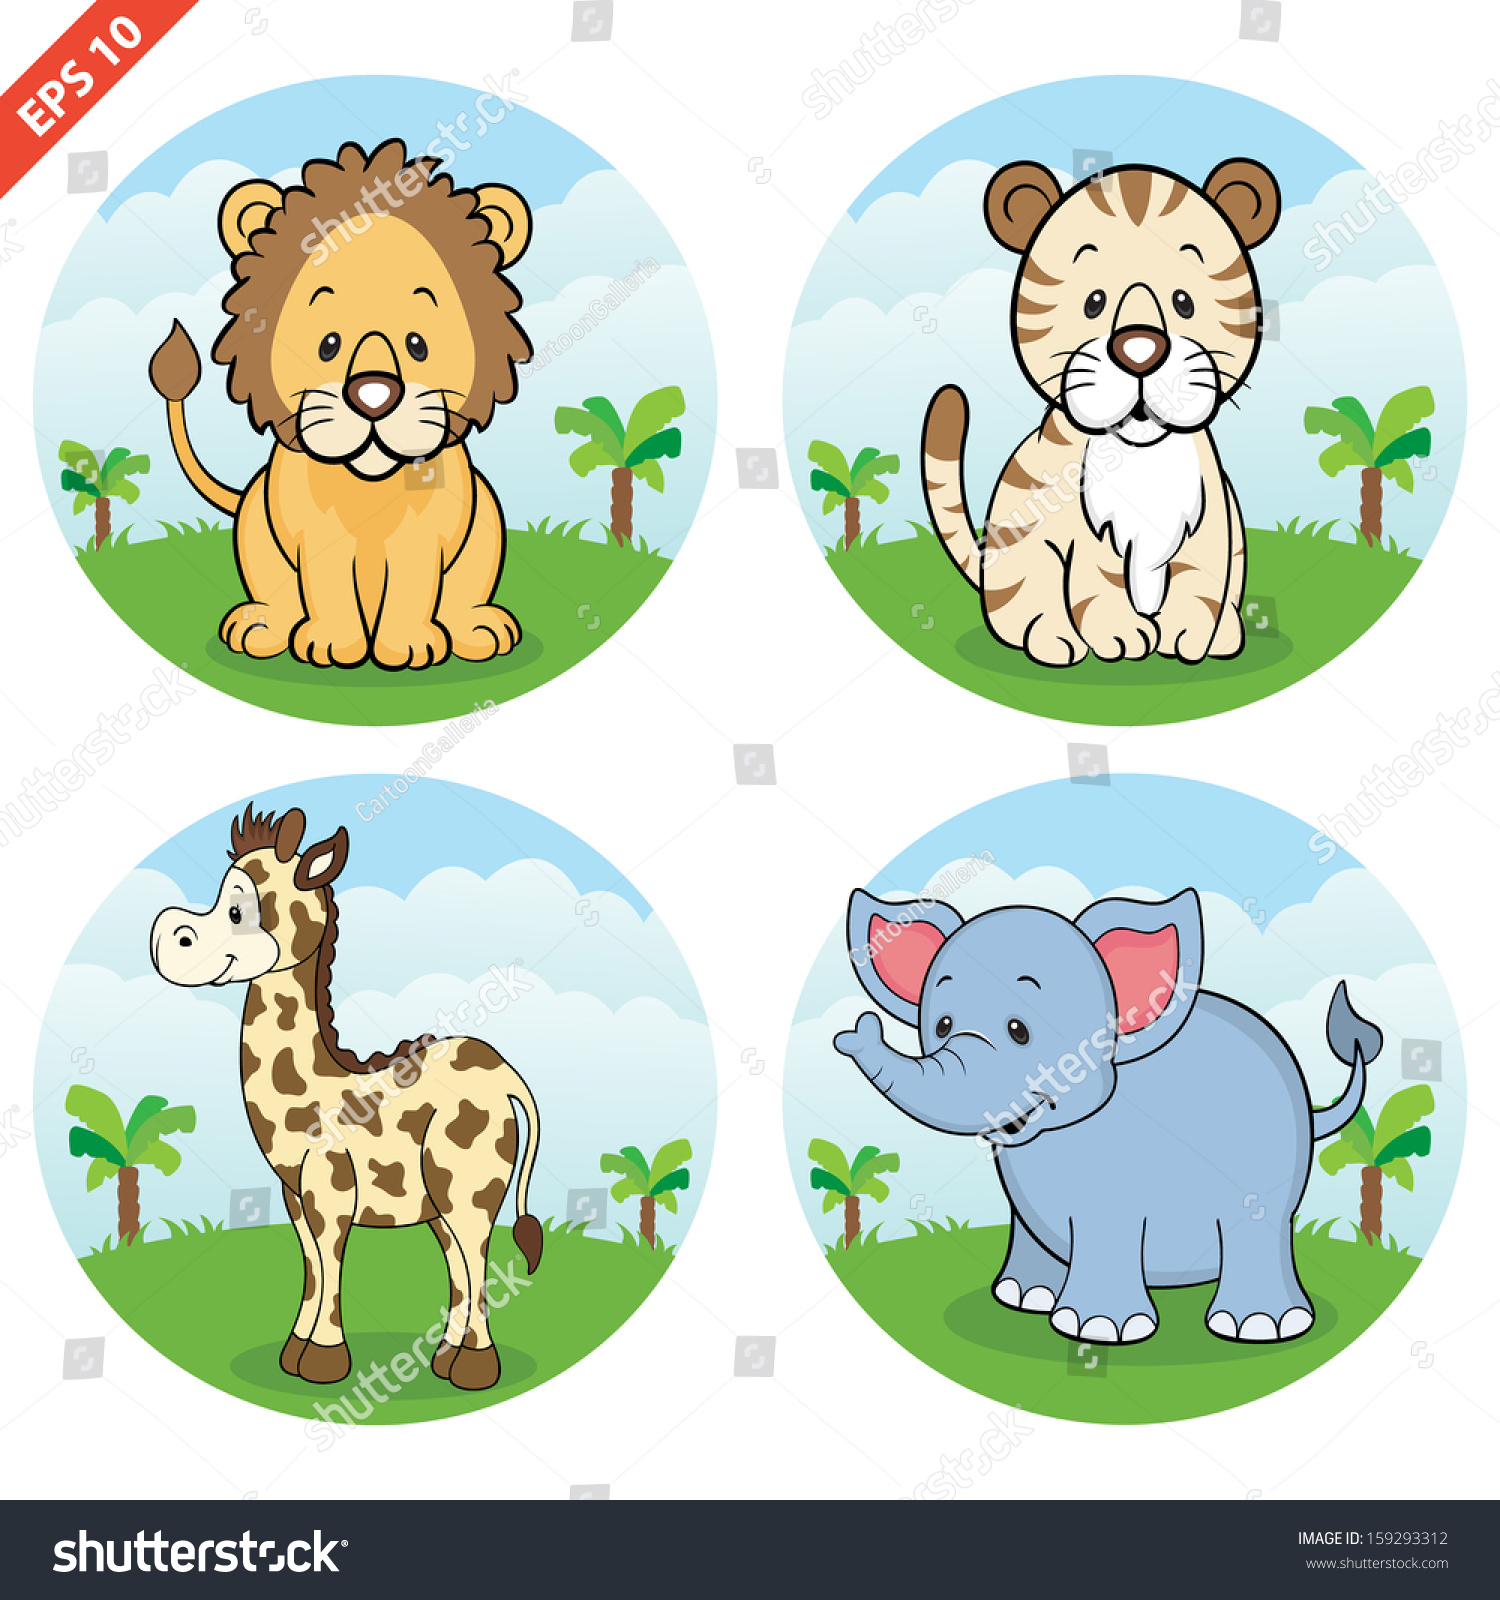 clipart pictures of wild animals - photo #26